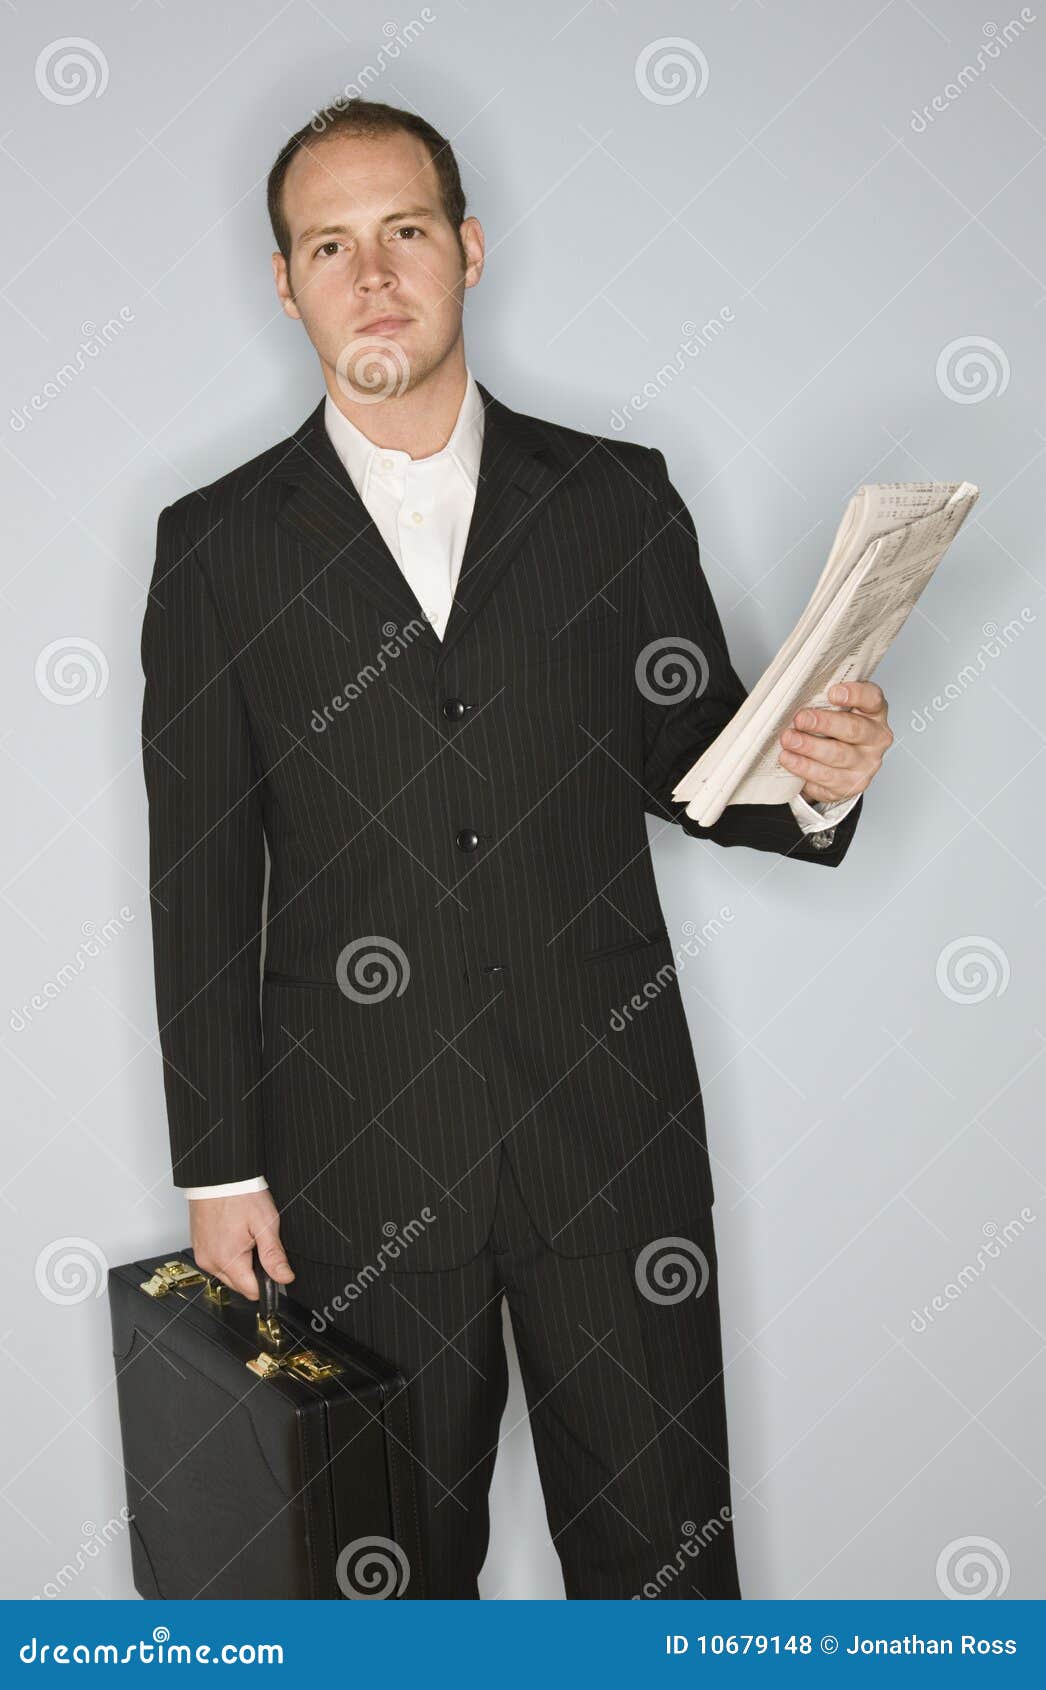 Man With Briefcase Royalty Free Stock Photos - Image: 10679148